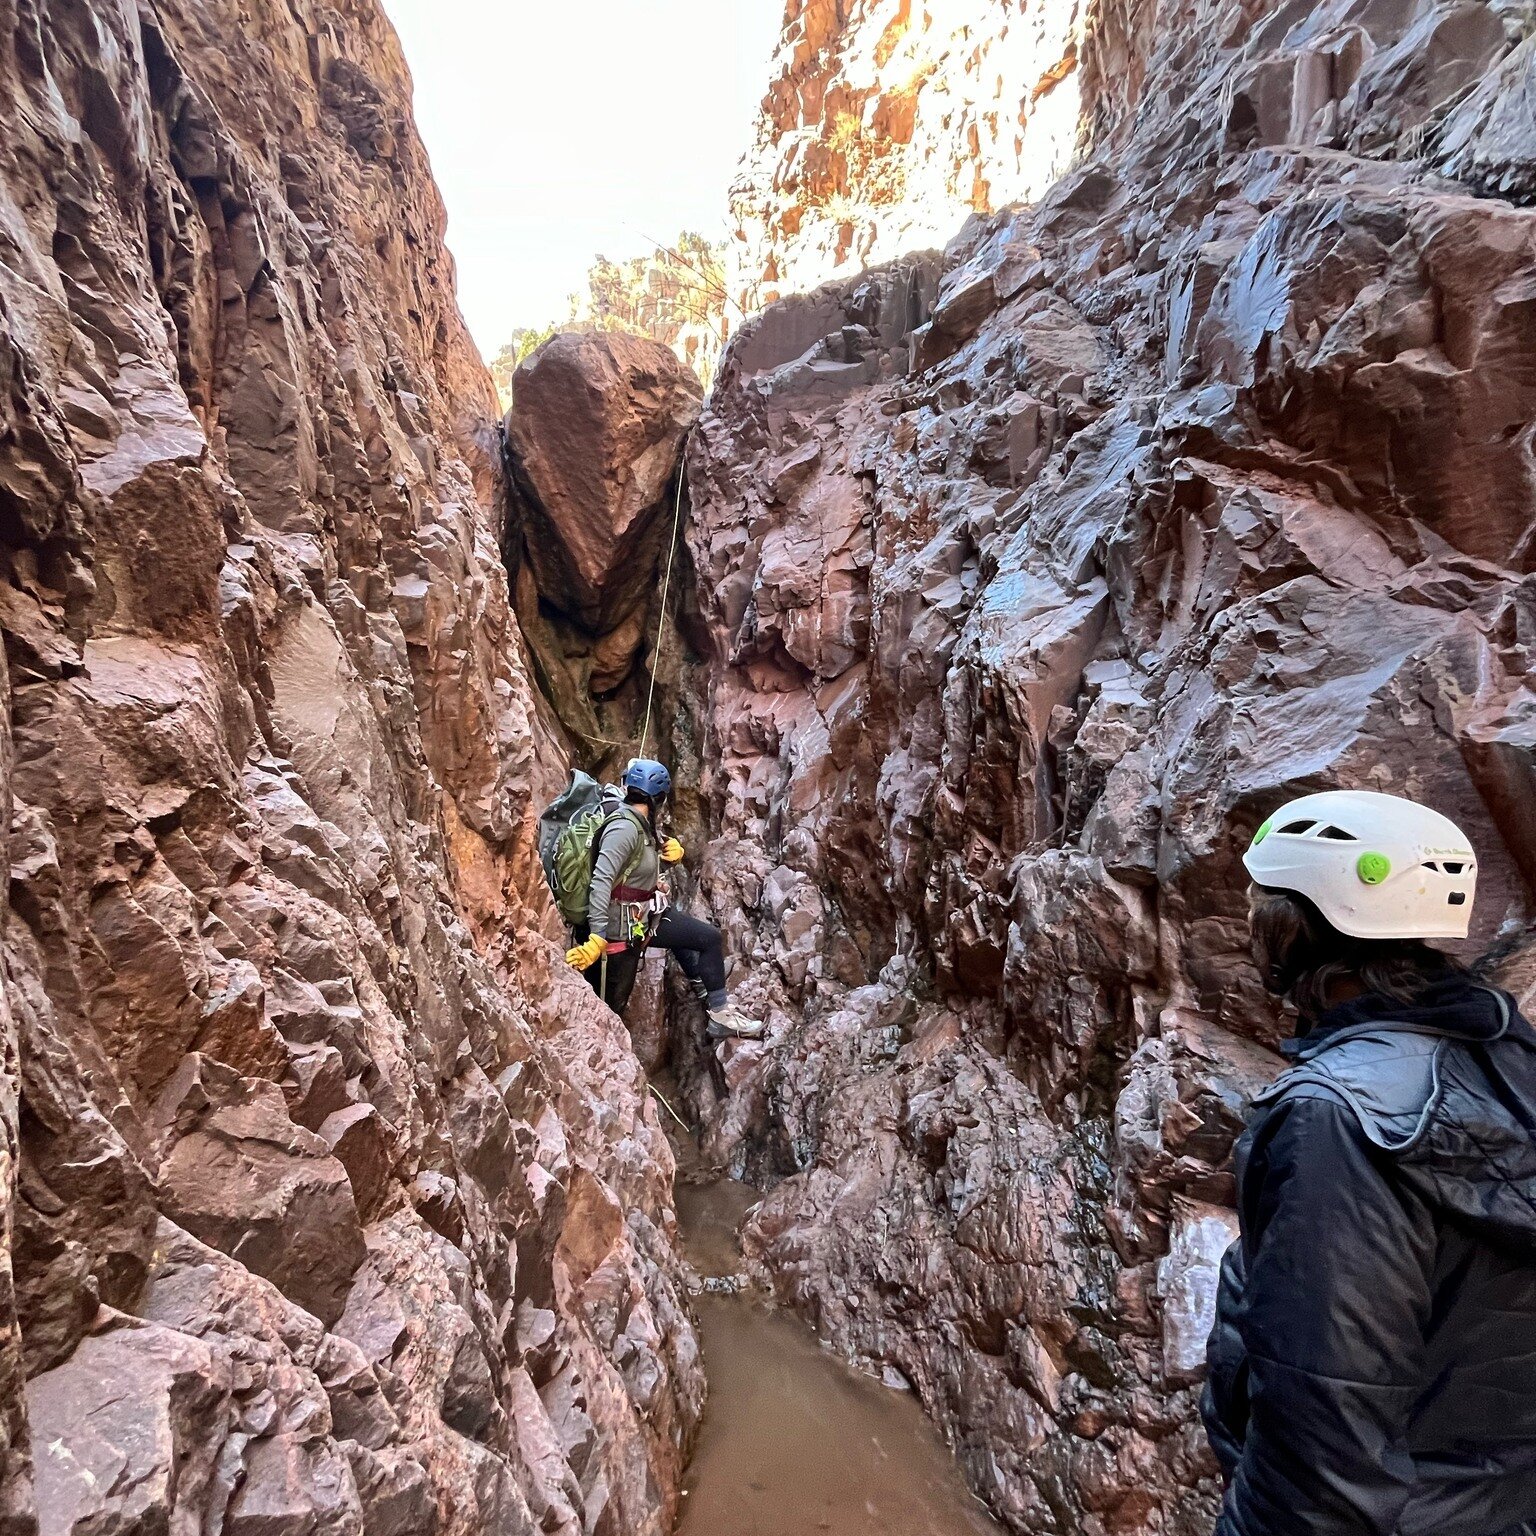 Canyoneering: Leap Year Descent of the Ice Box. Led by NMMC Climb Section Leader Corey N. #climbnewmexico #NMMC #newmexicoadventure #canyoneering #newmexicoclimbingroup #newmexicomountainclub #icebox